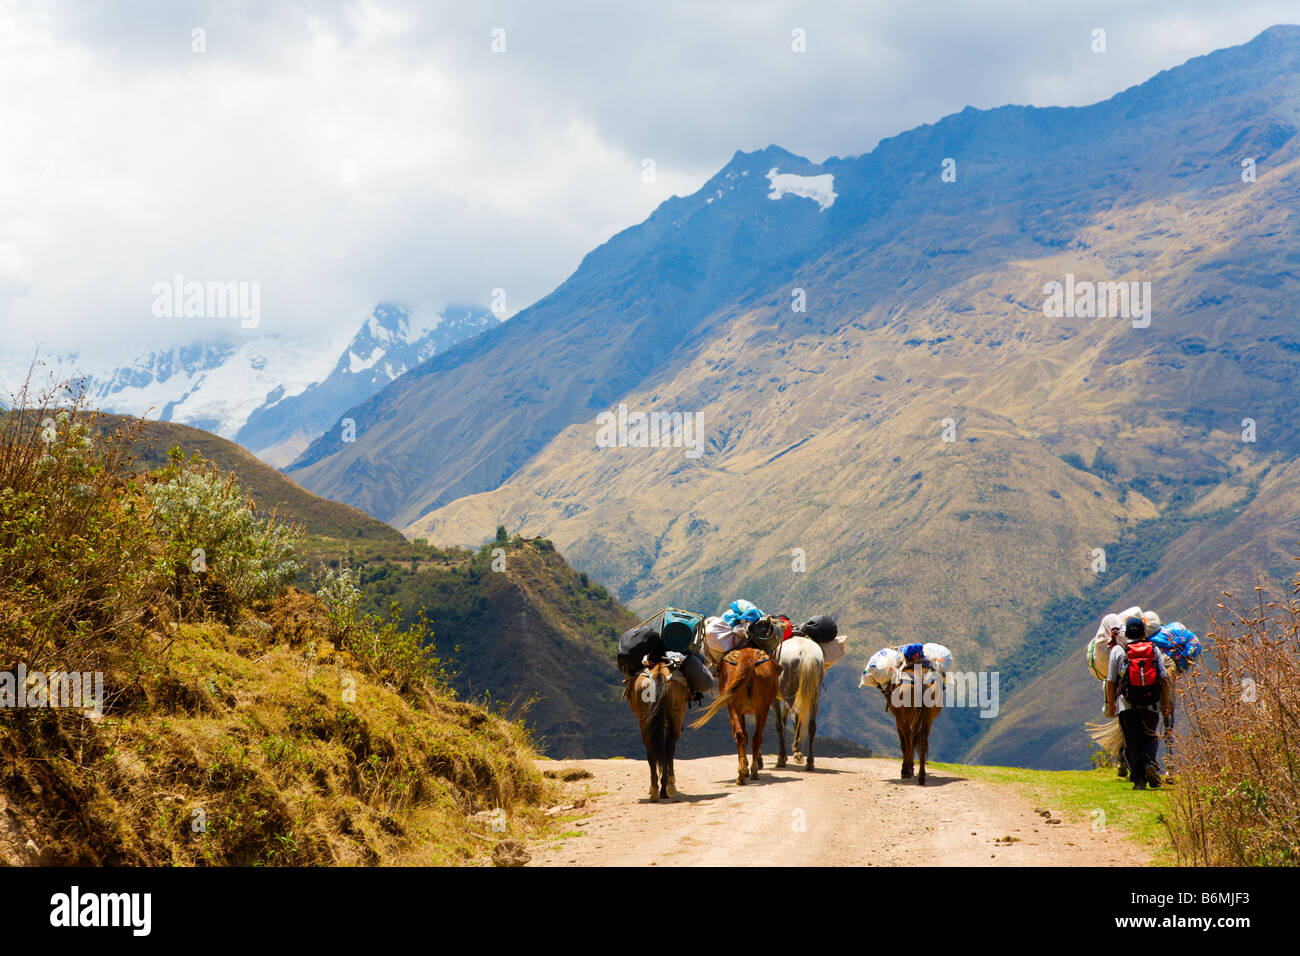 On the road in Andes Stock Photo